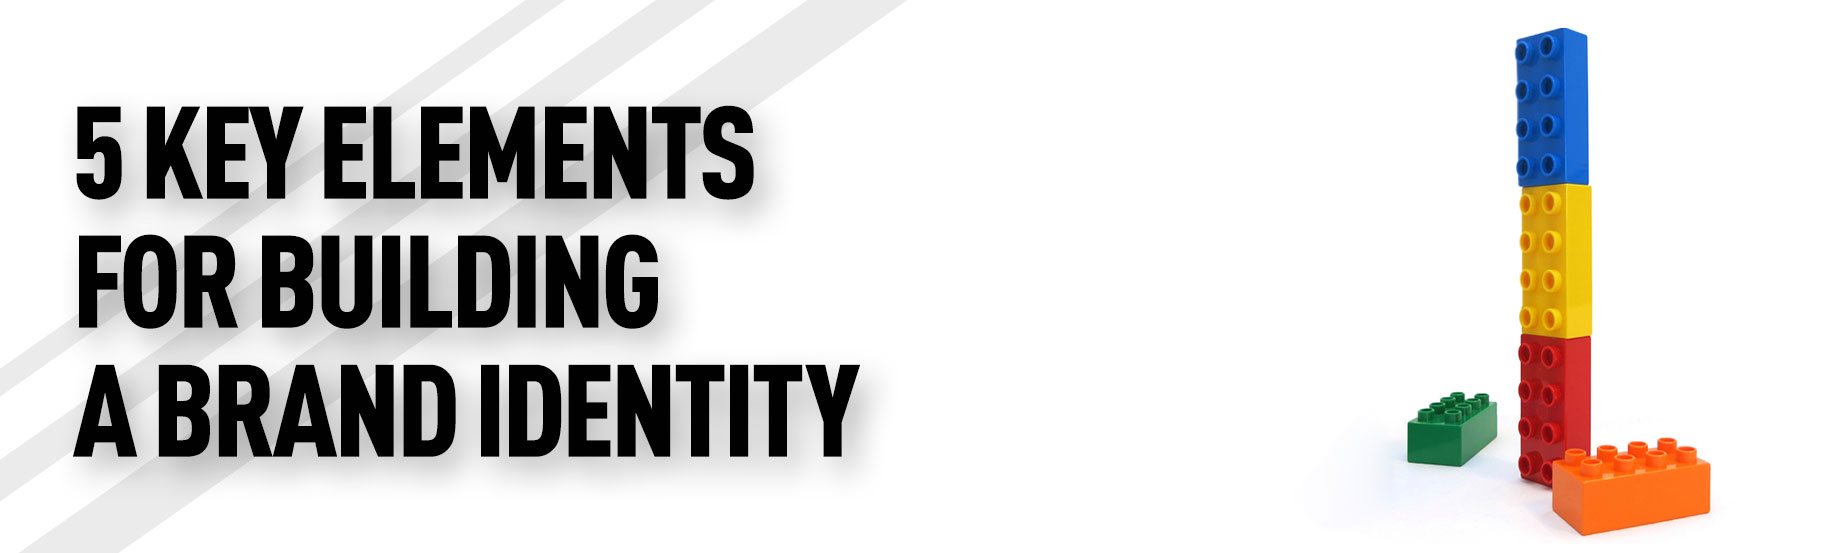 5 key elements for building a brand identity